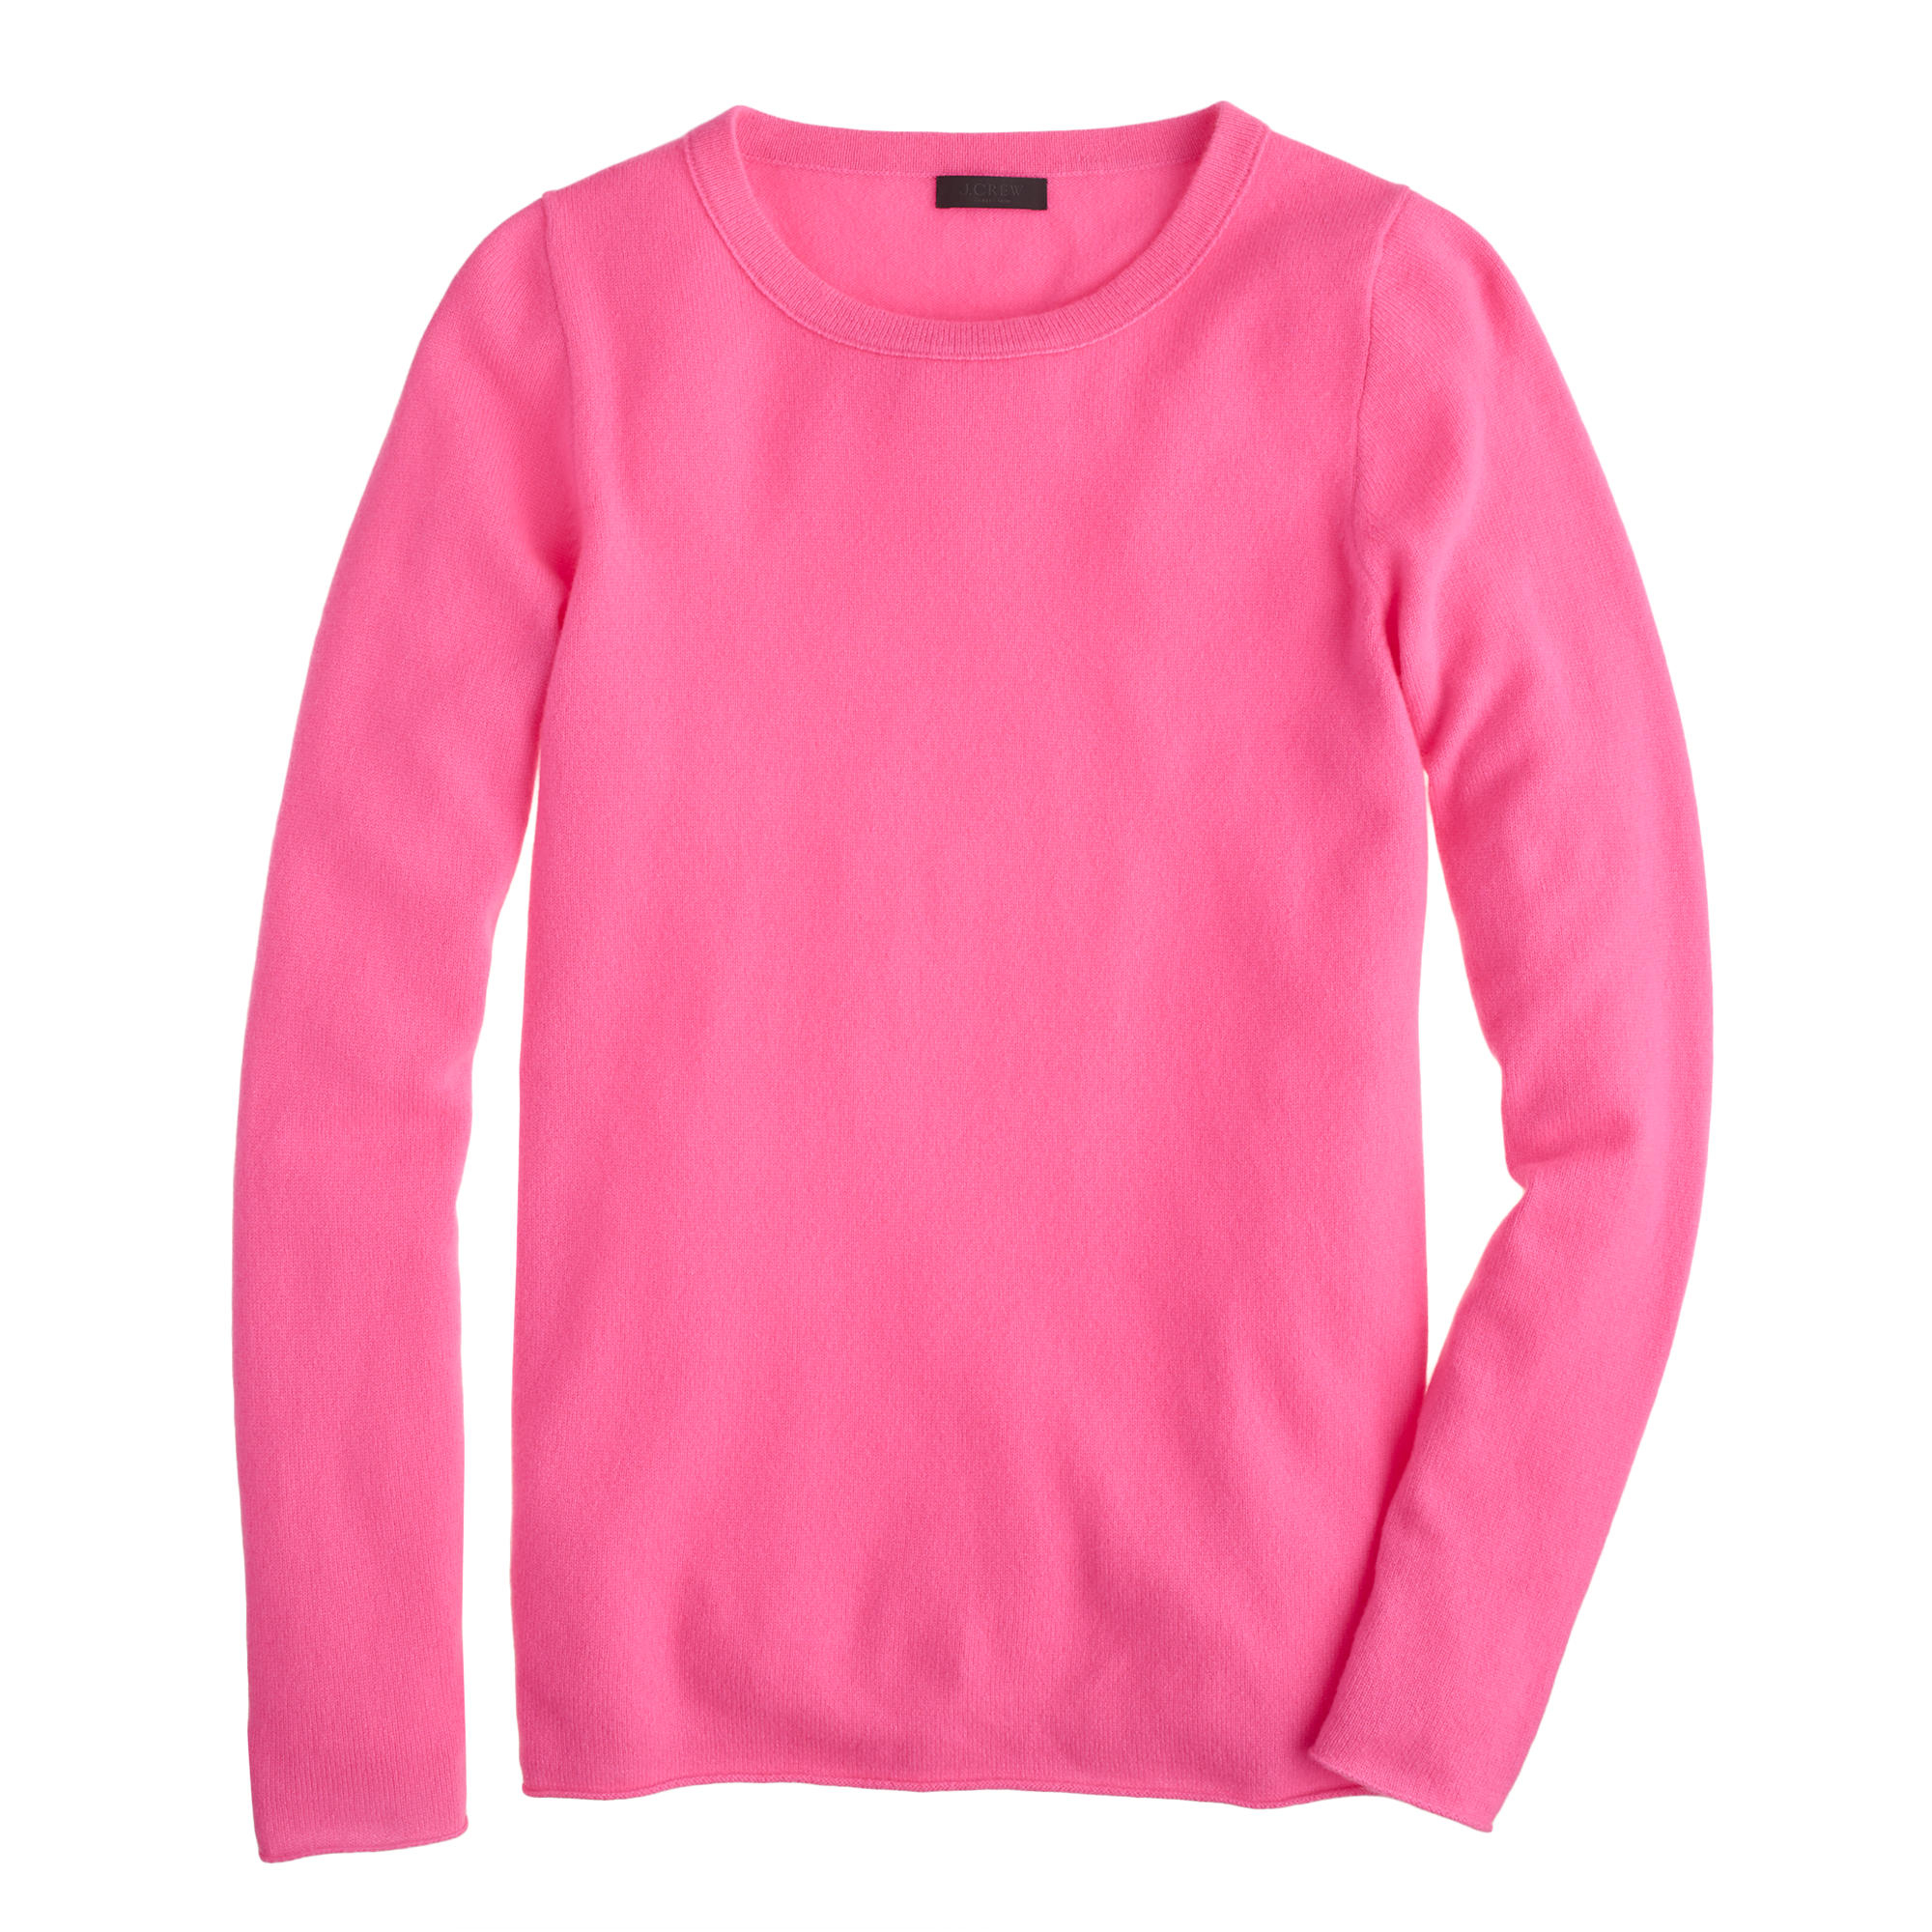 J.crew Italian Cashmere Long-sleeve T-shirt in Pink | Lyst